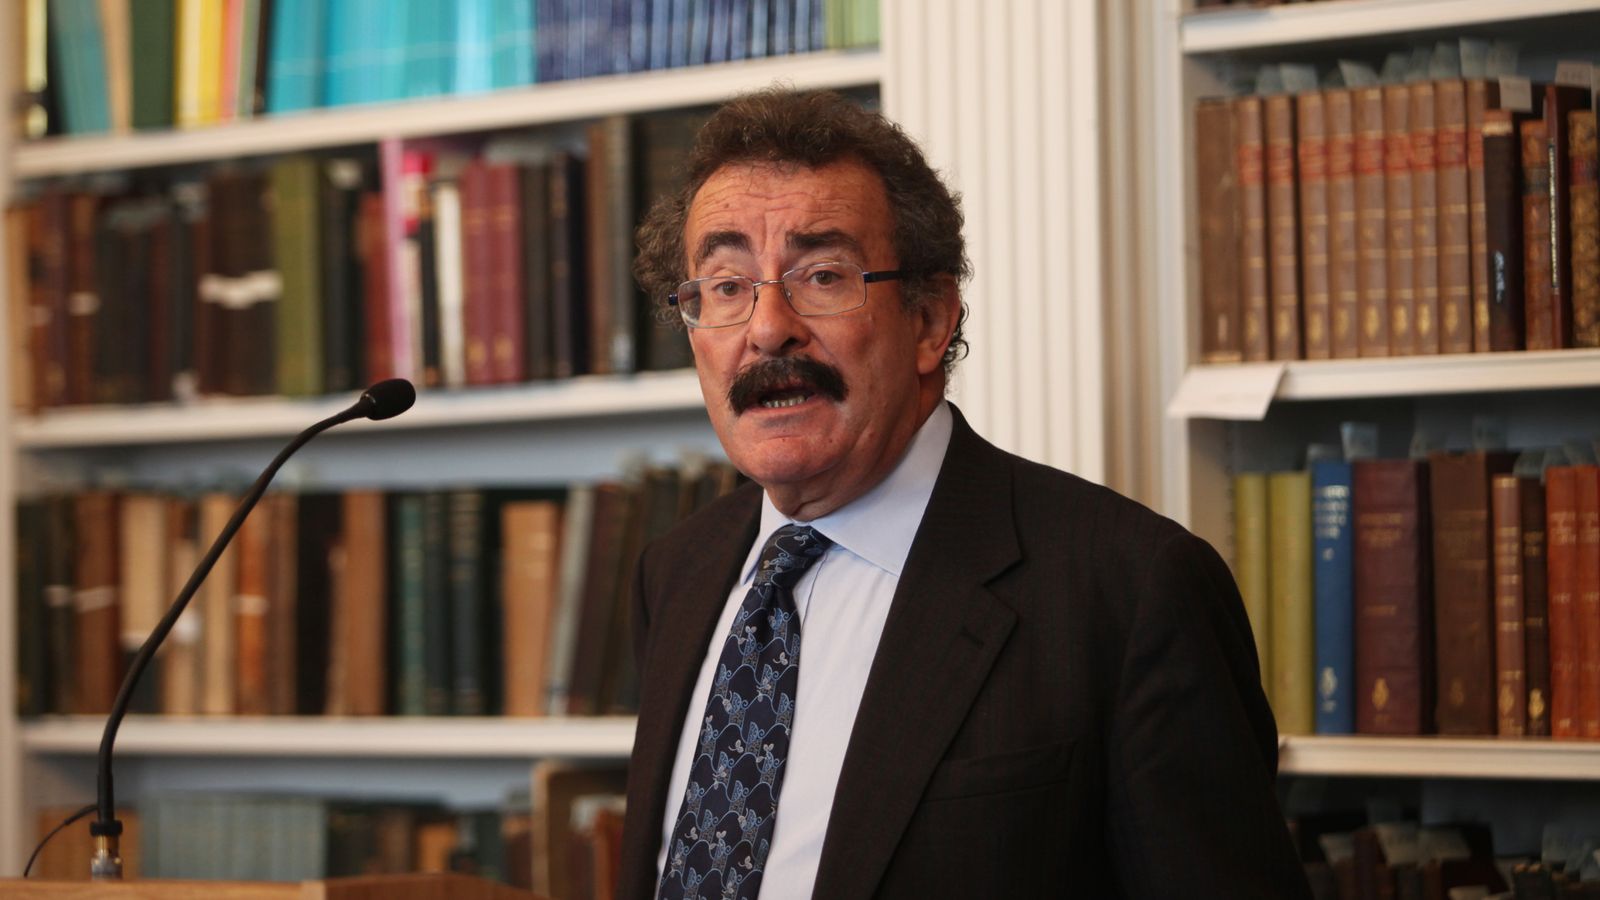 Professor Lord Winston 'not optimistic' about the NHS as leaders debate future